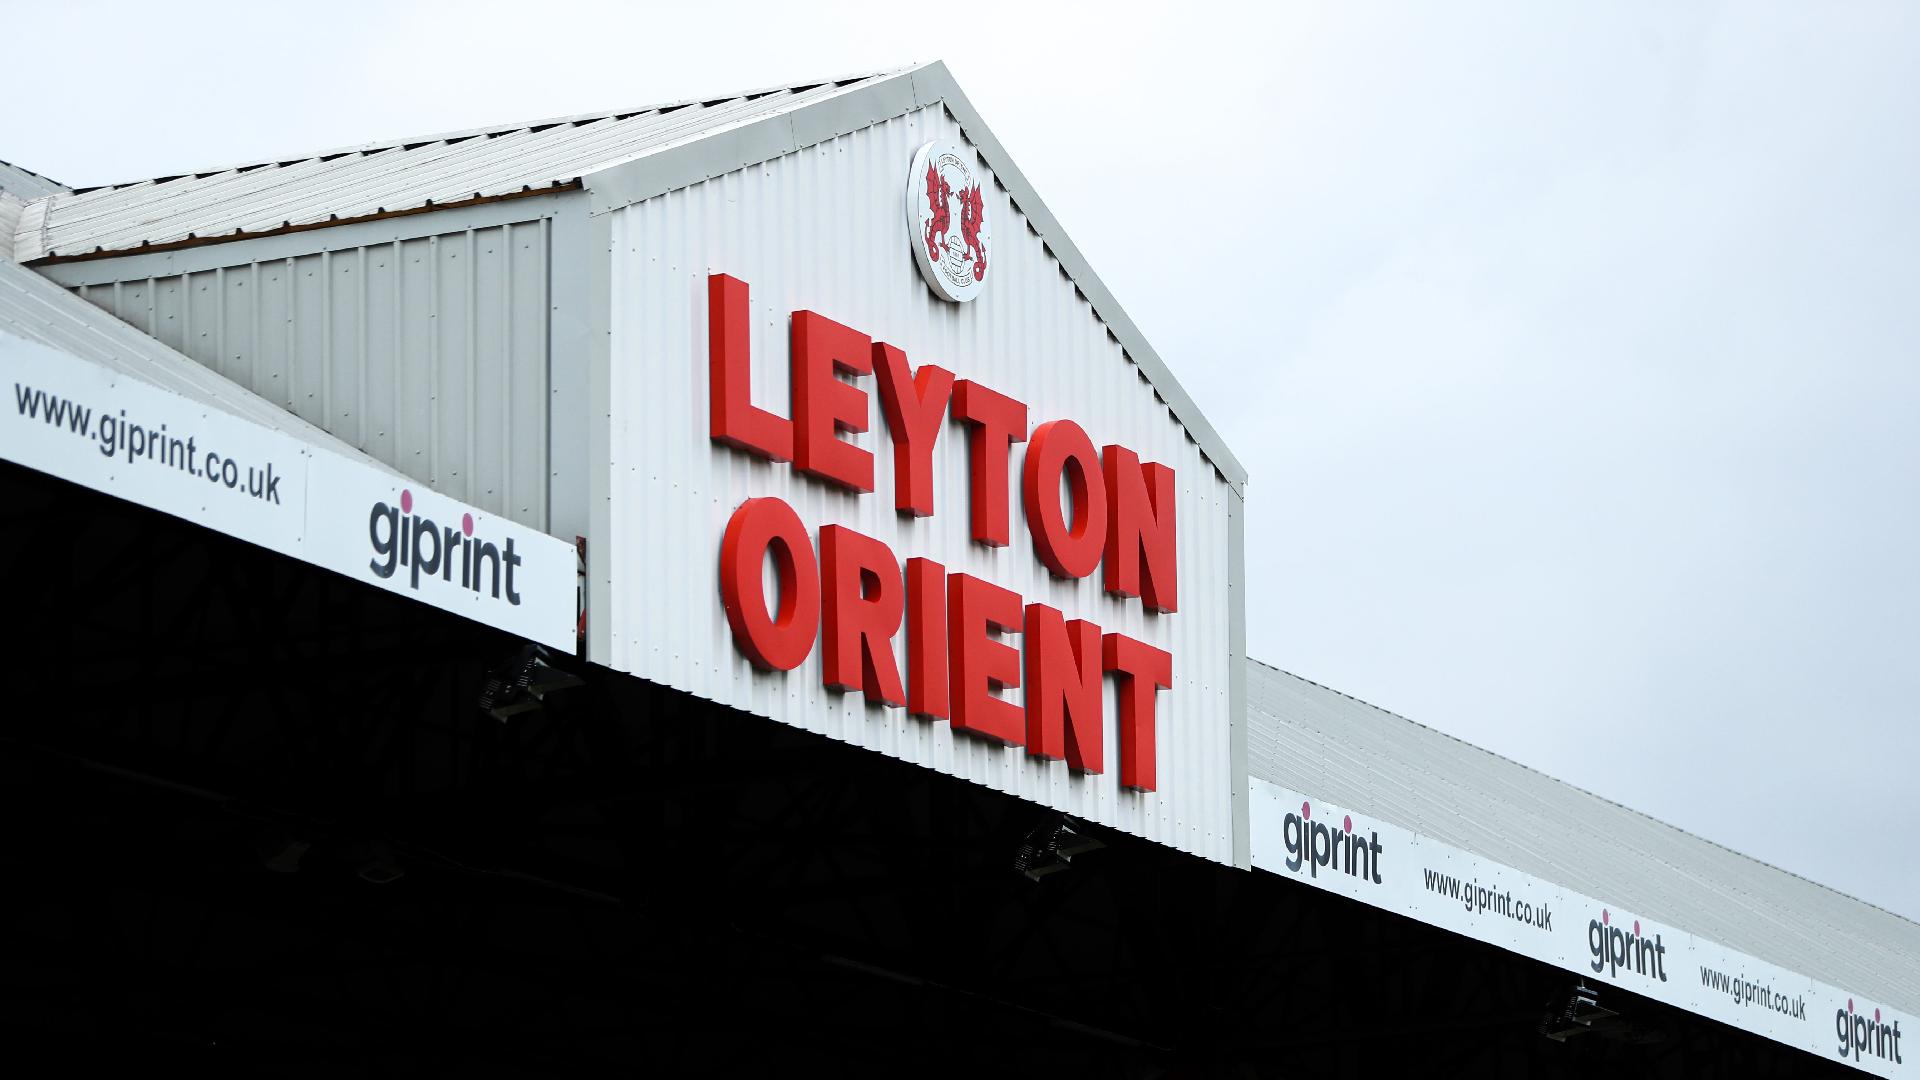 Leyton Orient-Lincoln abandoned after medical emergency in the crowd